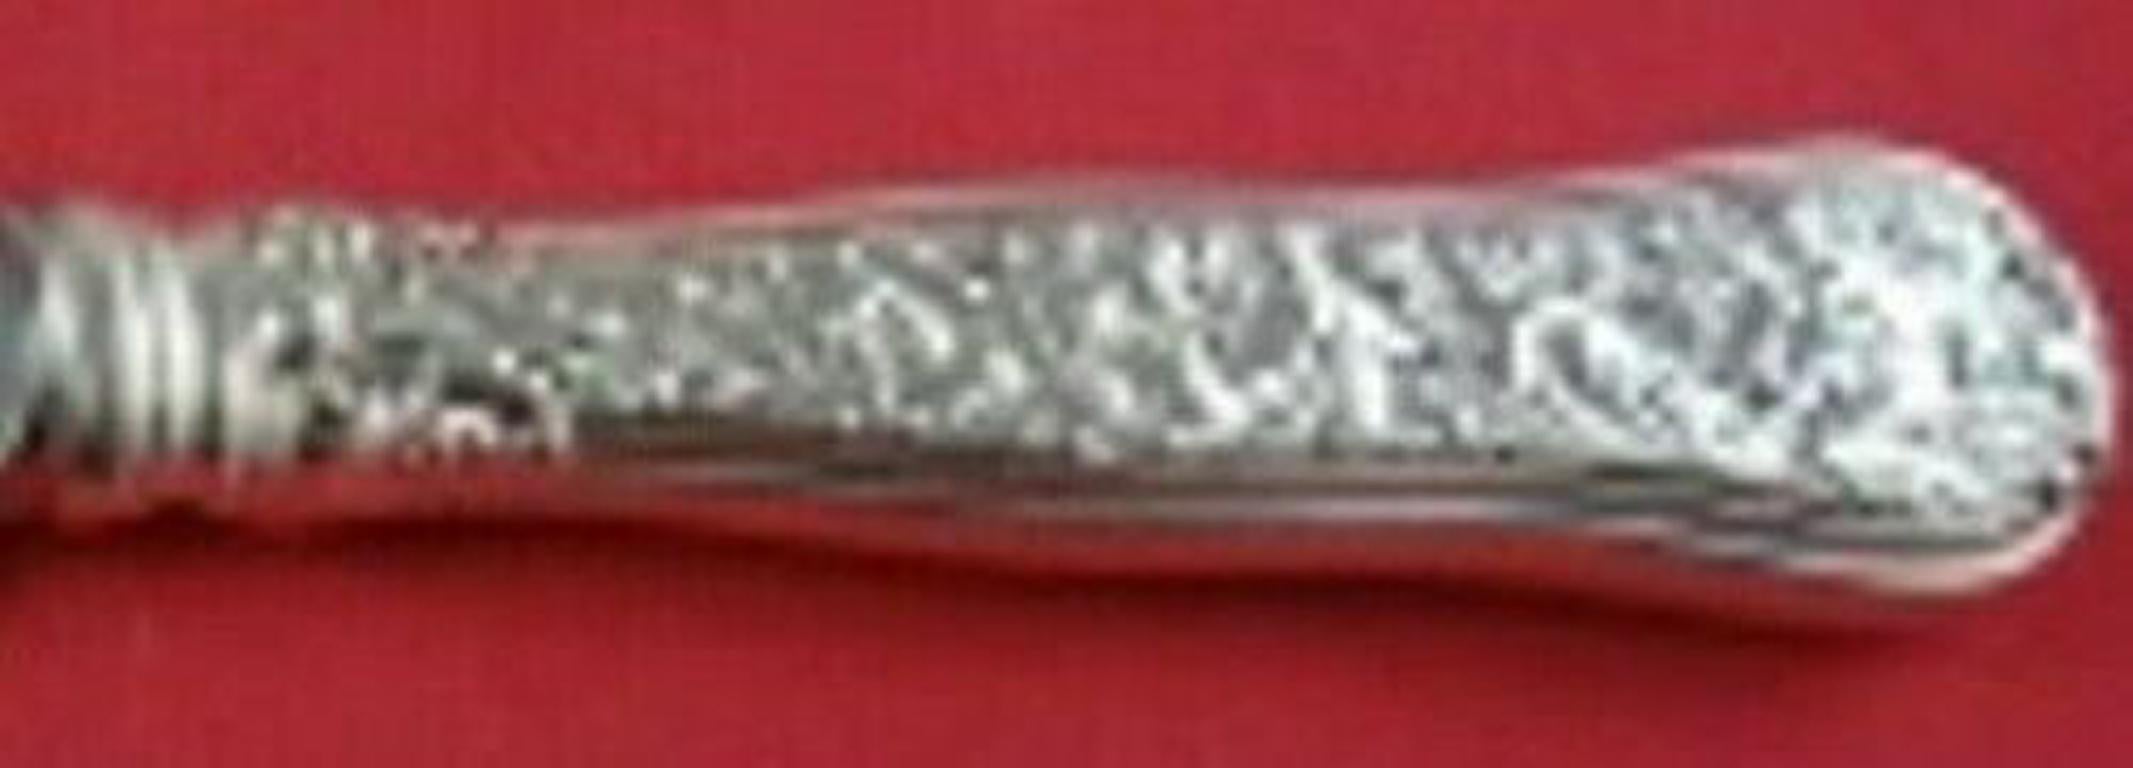 Sterling silver hollow handle with blunt stainless blade banquet knife 10 1/2